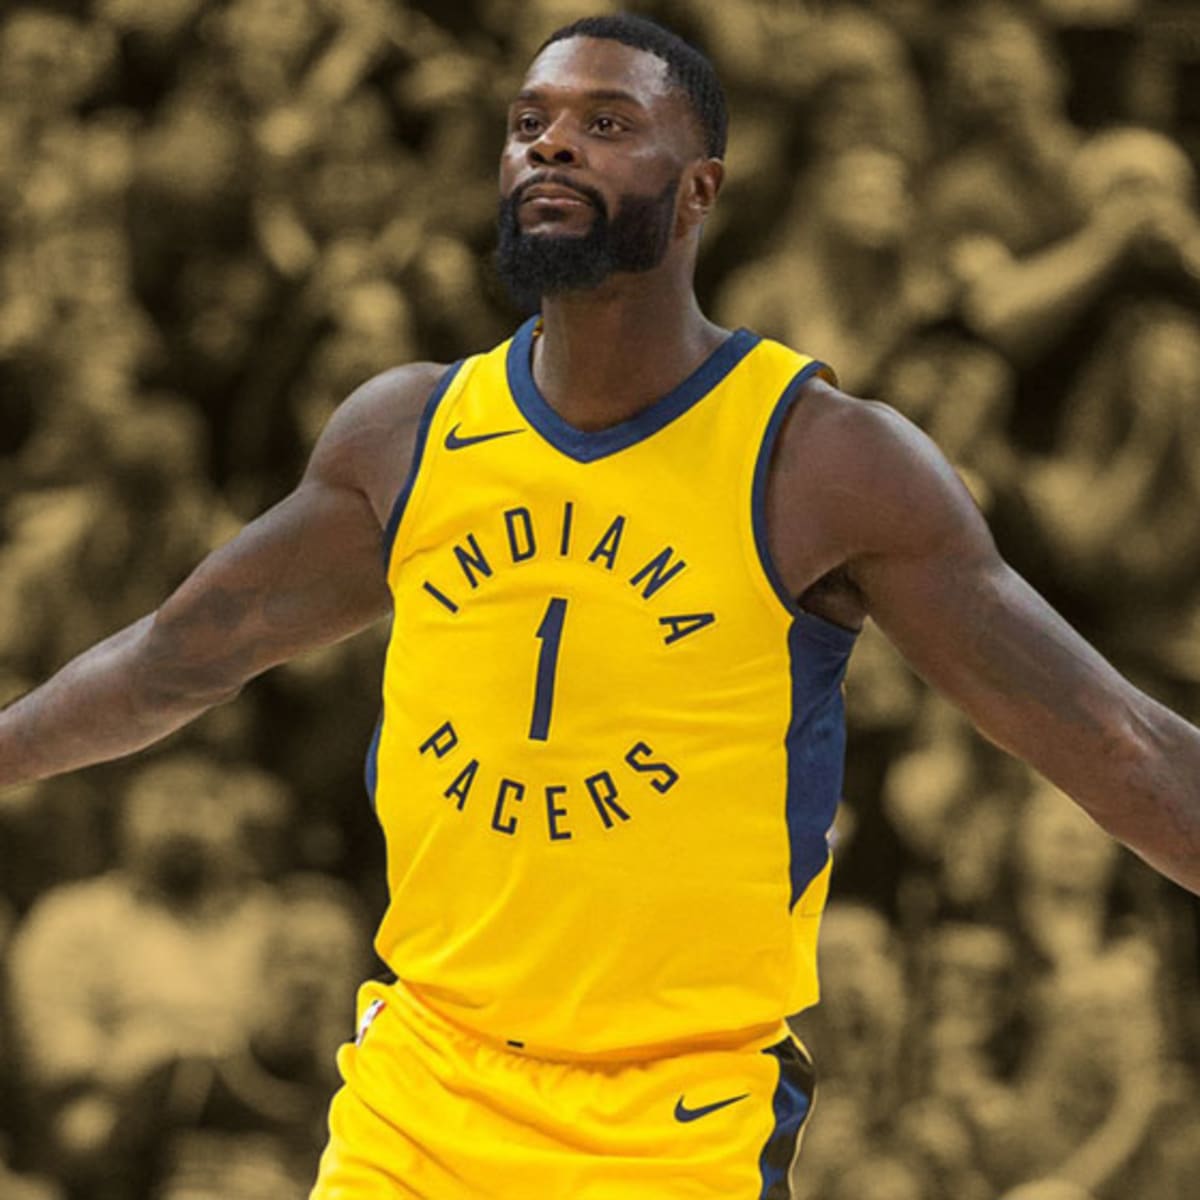 Lance Stephenson wants NBA return to be with Knicks or Nets